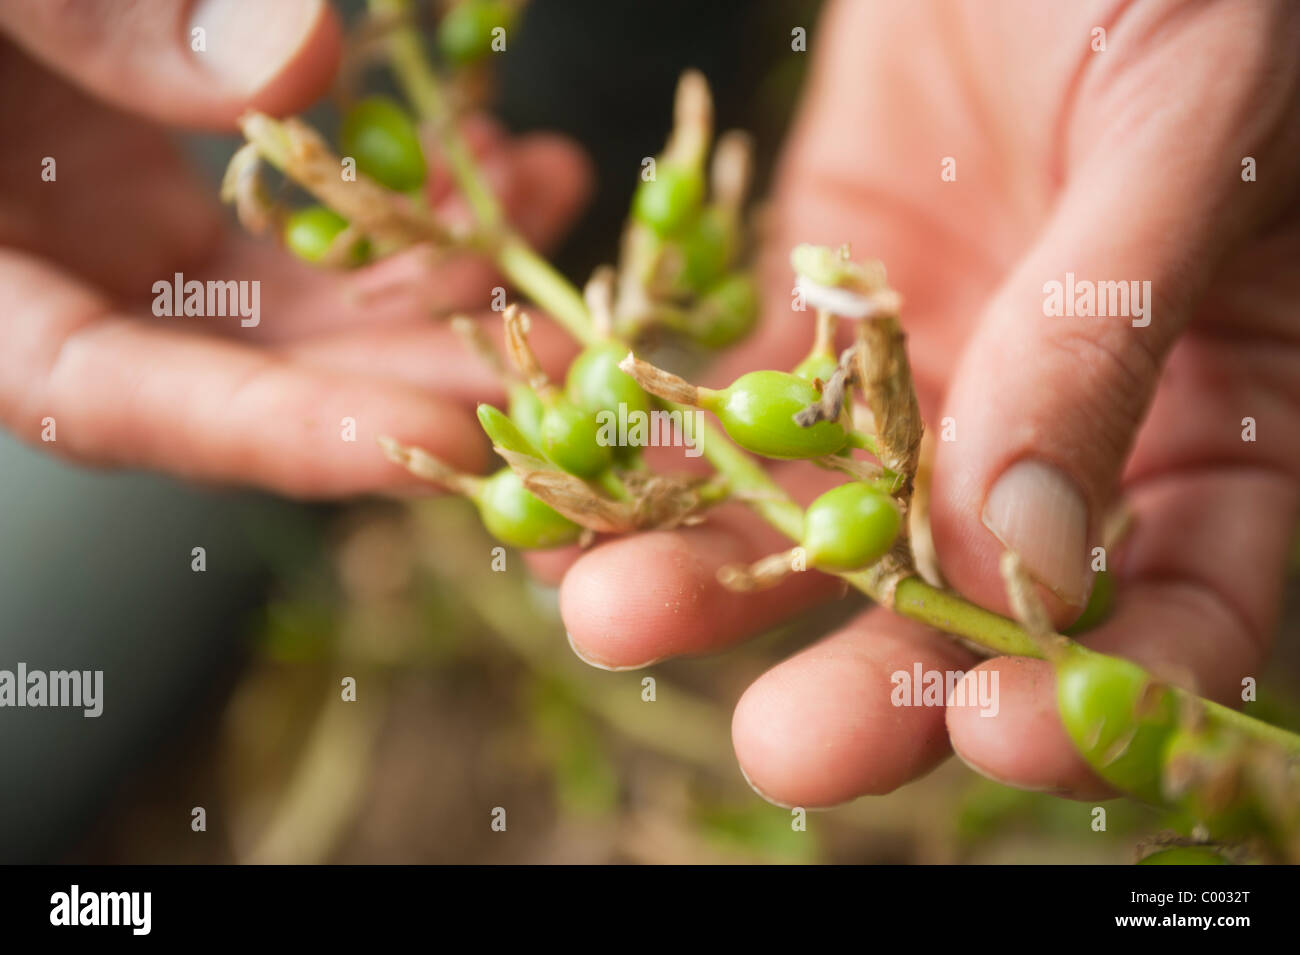 Green Cardamom or Elettaria plant before pods are harvested by hand, growing on a farm in Honduras, Central America. Stock Photo